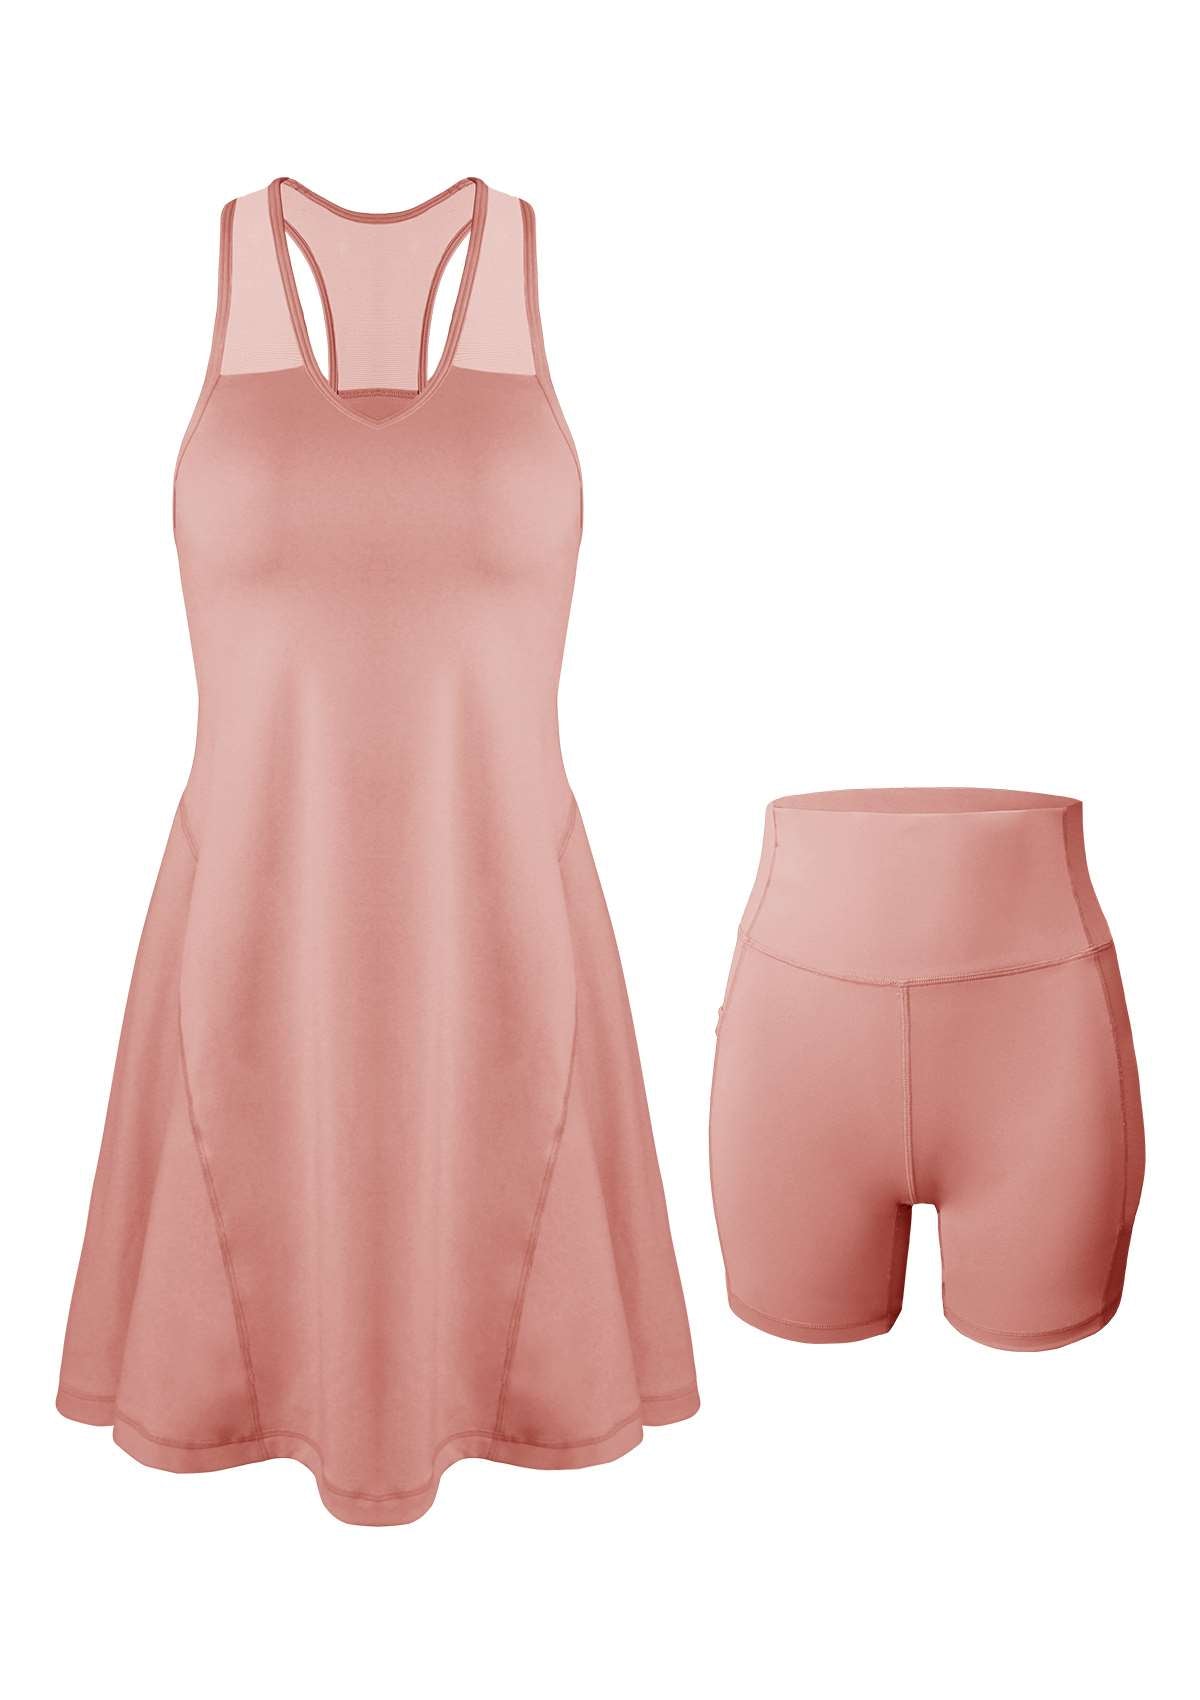 SONGFUL On The Move Sports Dress With Shorts Set - L / Coral